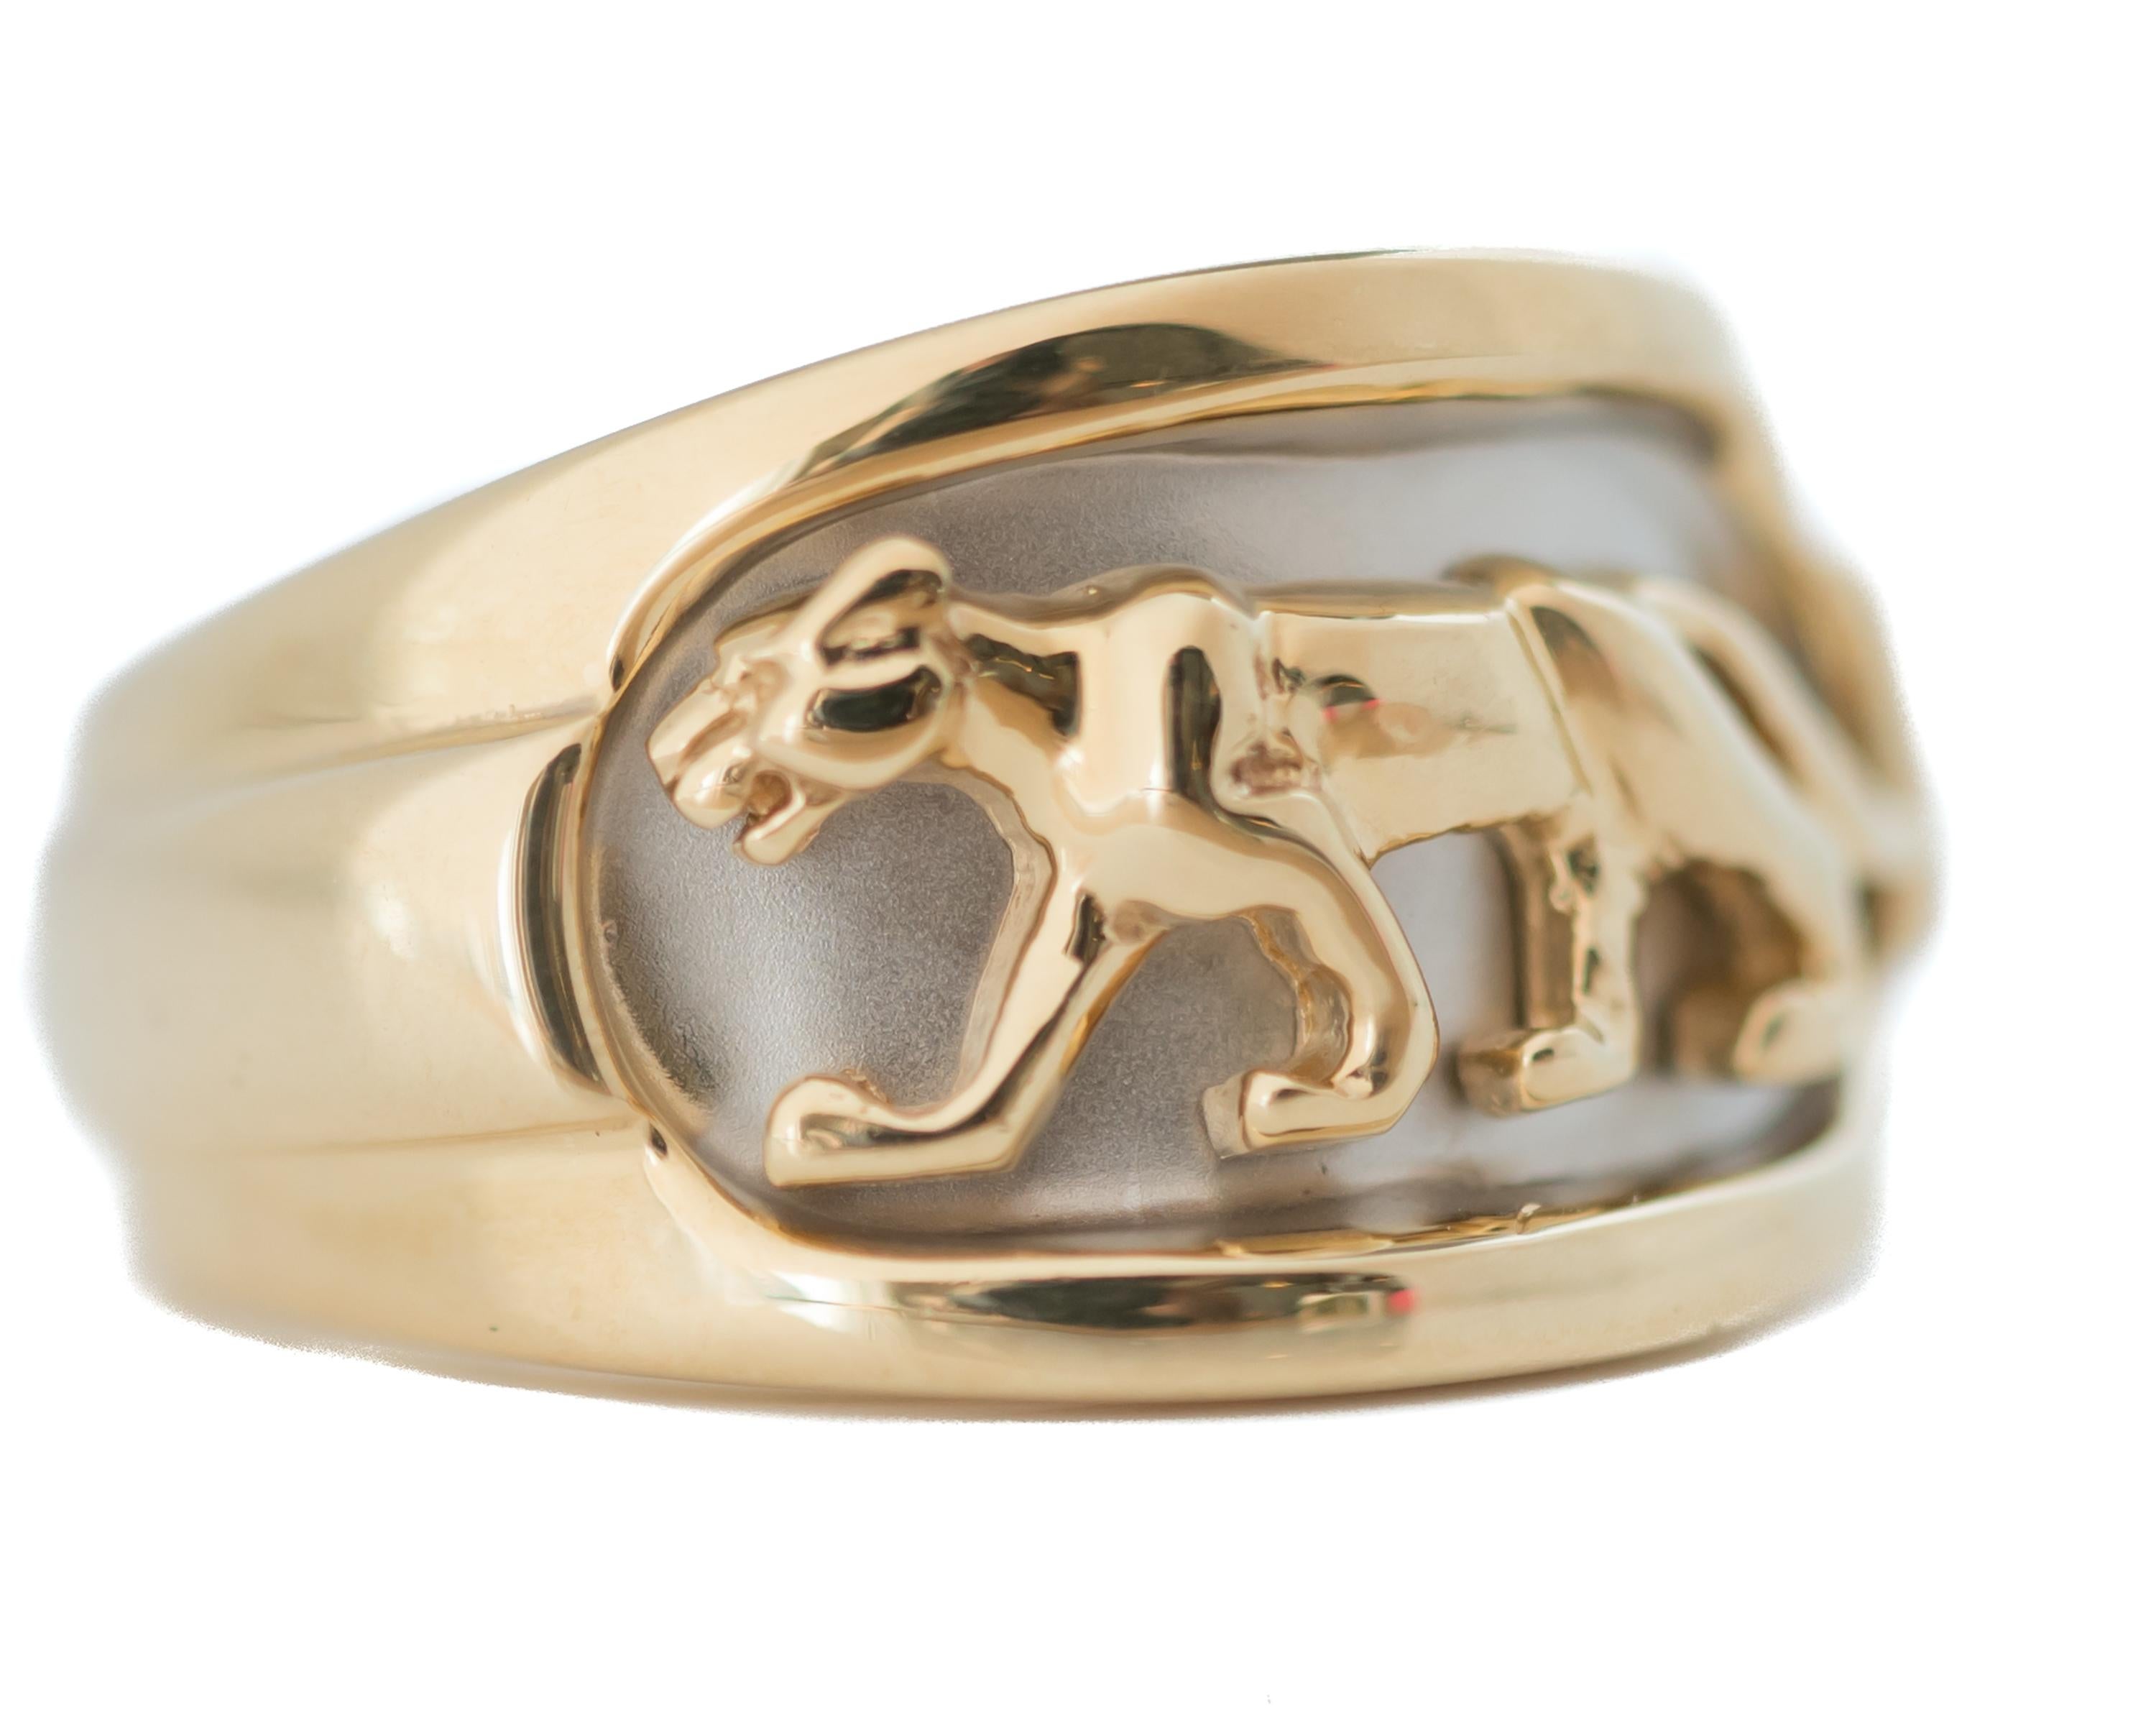 Gold Panther, Cougar Ring - 14 Karat Yellow Gold, 14 Karat White Gold

Features:
14 karat Yellow Gold
14 karat White Gold face
Raised Panther/Cougar Design
Width tapers from 12 - 5 millimeters
Finger to top of ring measures 2.5 millimeters
Ring fit